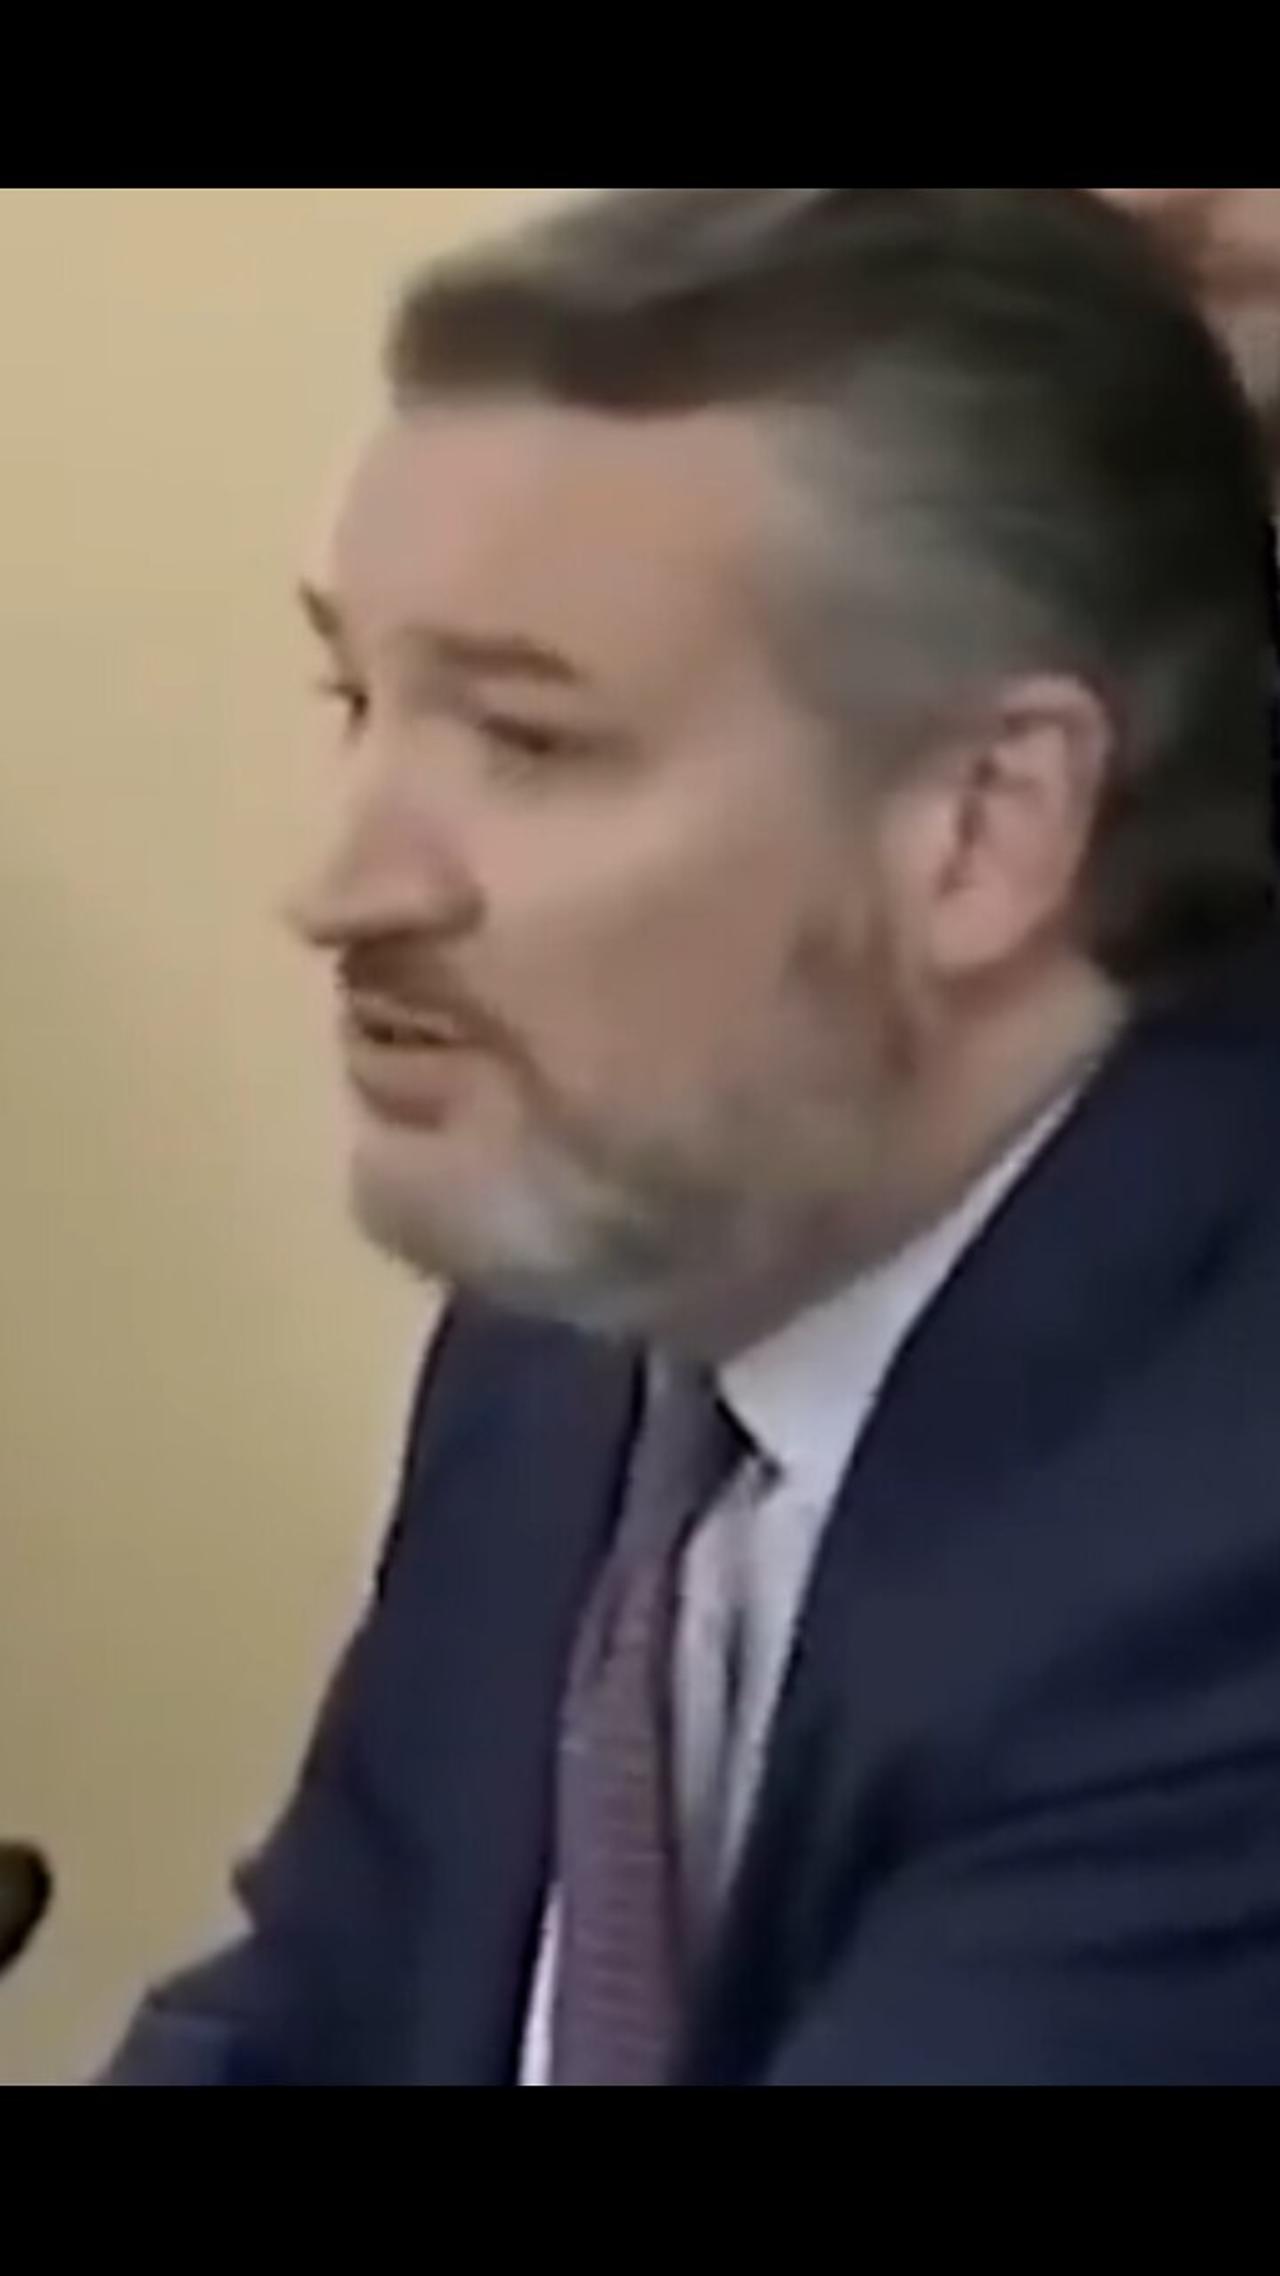 Ted Cruz "Kids apparently drink like crazy guys, party when you got it!"